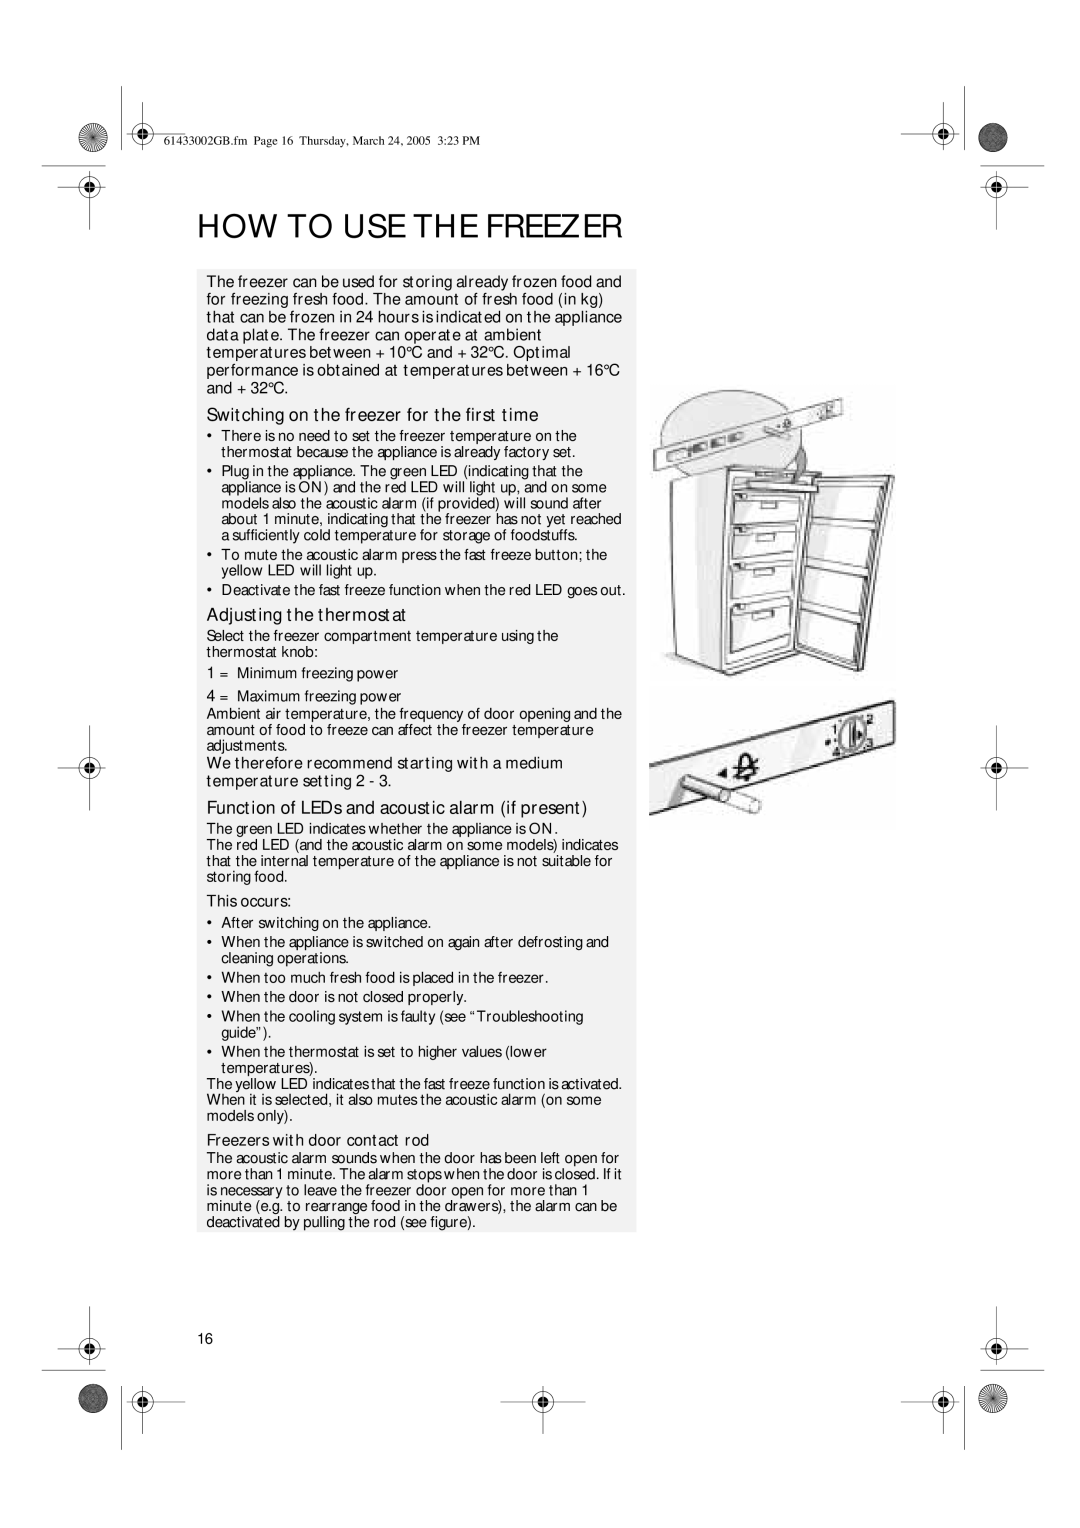 CDA FW480 manual How To Use The Freezer, Switching on the freezer for the first time, Adjusting the thermostat, This occurs 